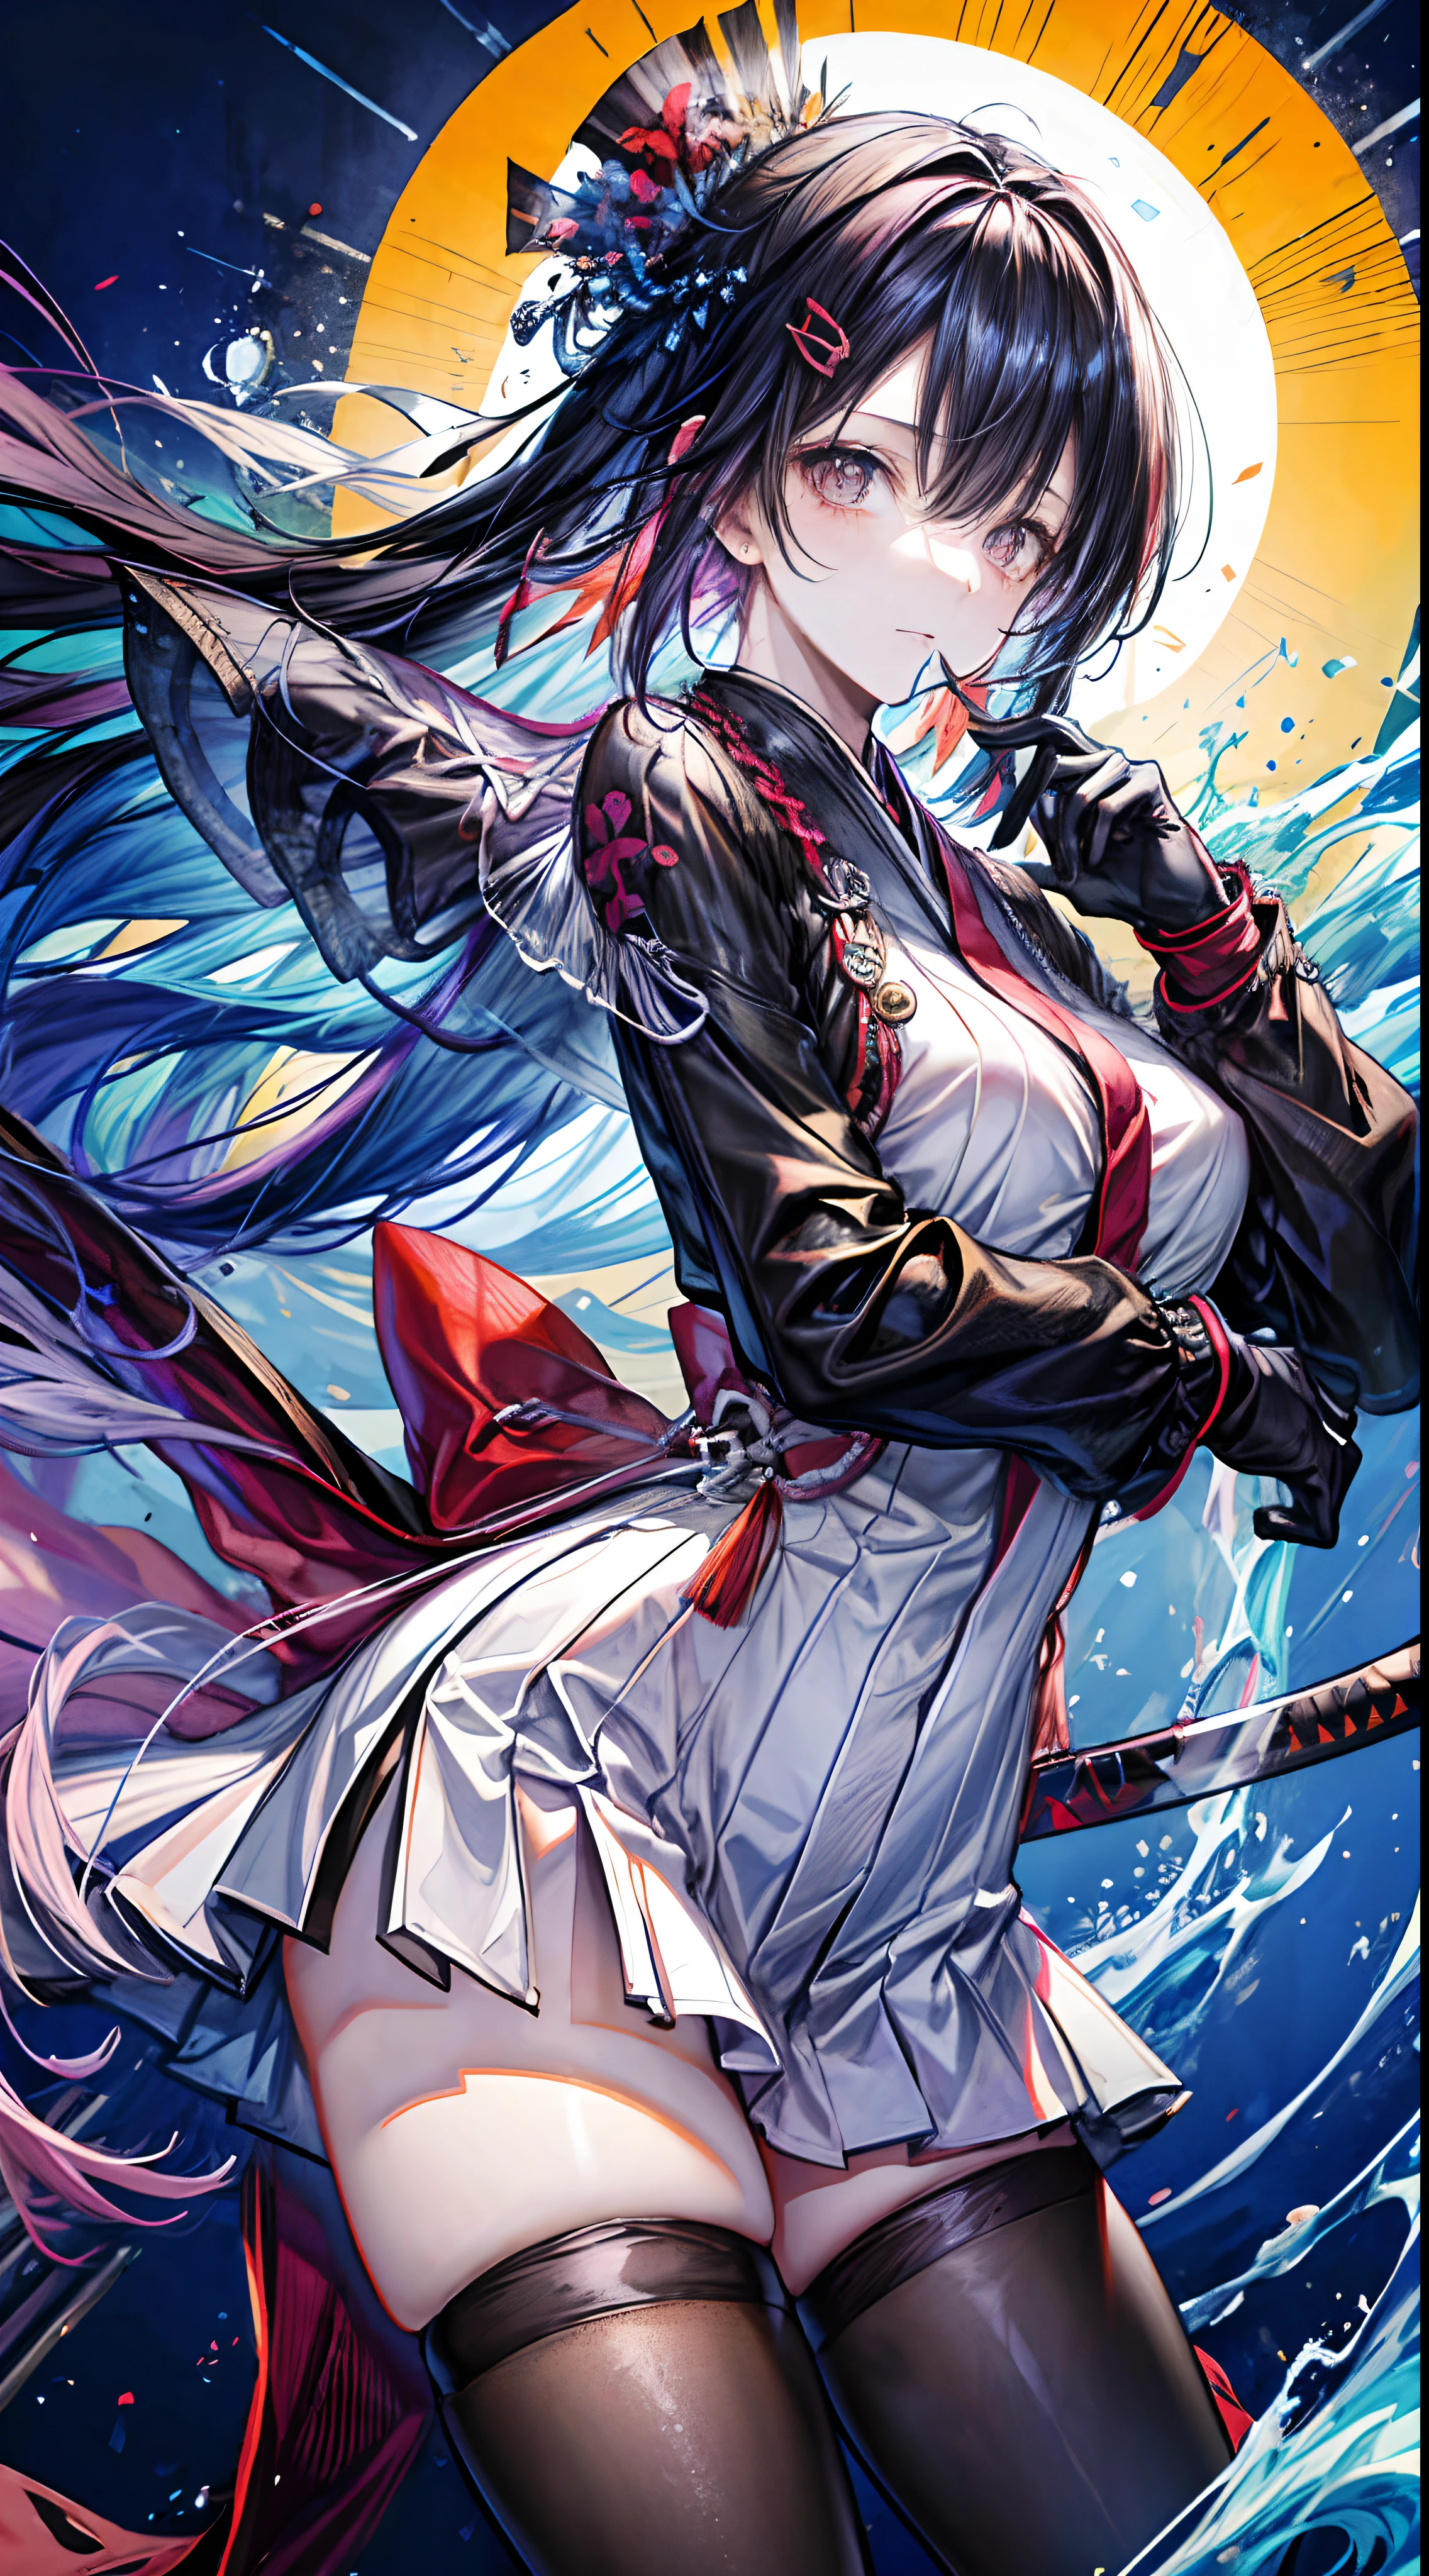 Colorful, Best Quality, masutepiece, hight resolution, Original, highly detailed wallpaper,1girl in, Bangs, Black_hair, breasts, Closed_Mouth, gloves, hair_ornament detached, Holding a Japan sword in his right hand, katanas, long_hair, long_sleeves, up looking_で_viewer, Multicolored_hair,  scabbard, Solo, unsheathing, The upper part of the body_Body, ,Perfect_Hands,Honggui